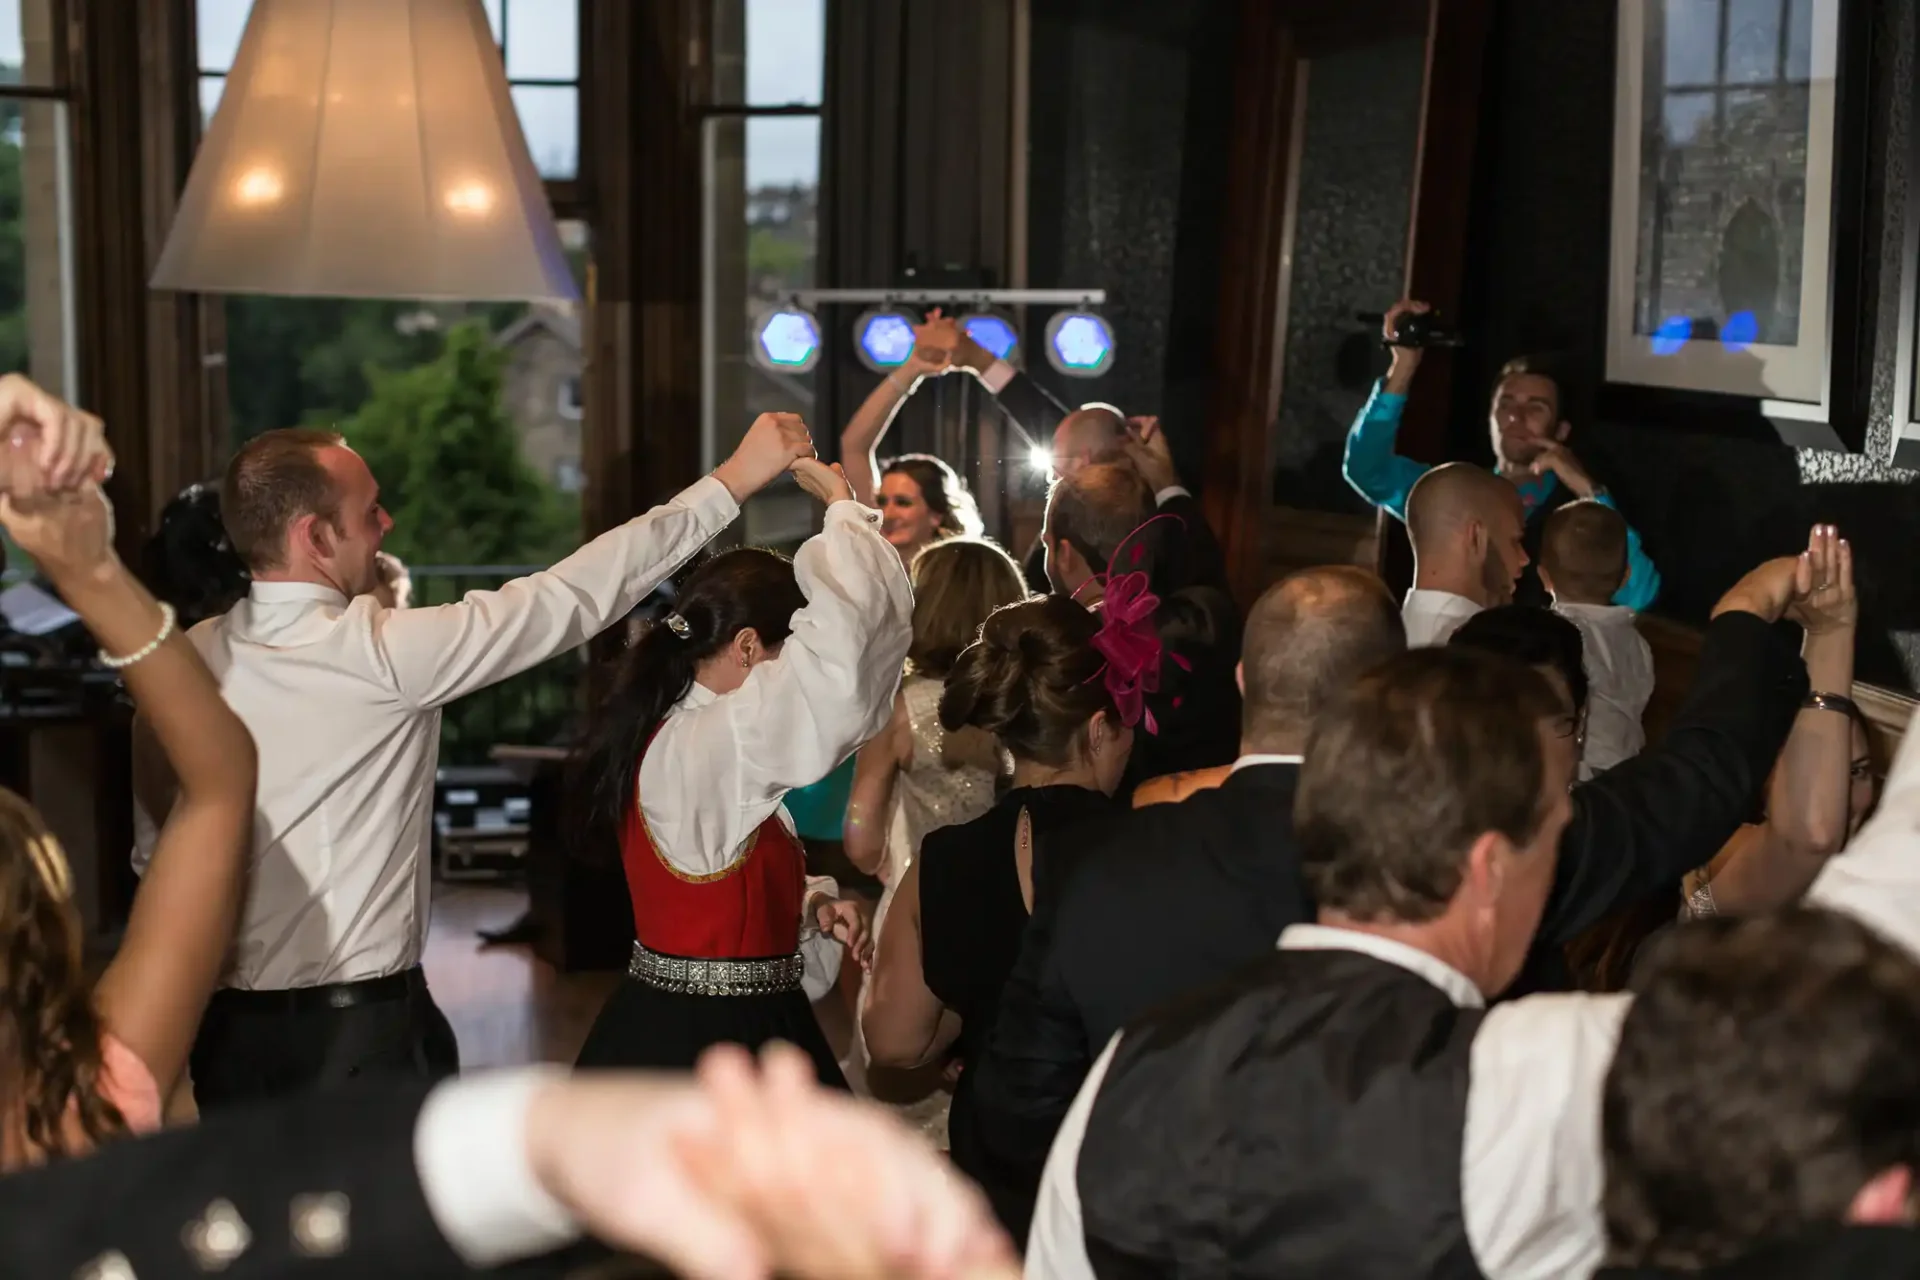 Guests dancing and celebrating enthusiastically at a lively indoor wedding reception, with focus on a joyful bride and groom in the center.